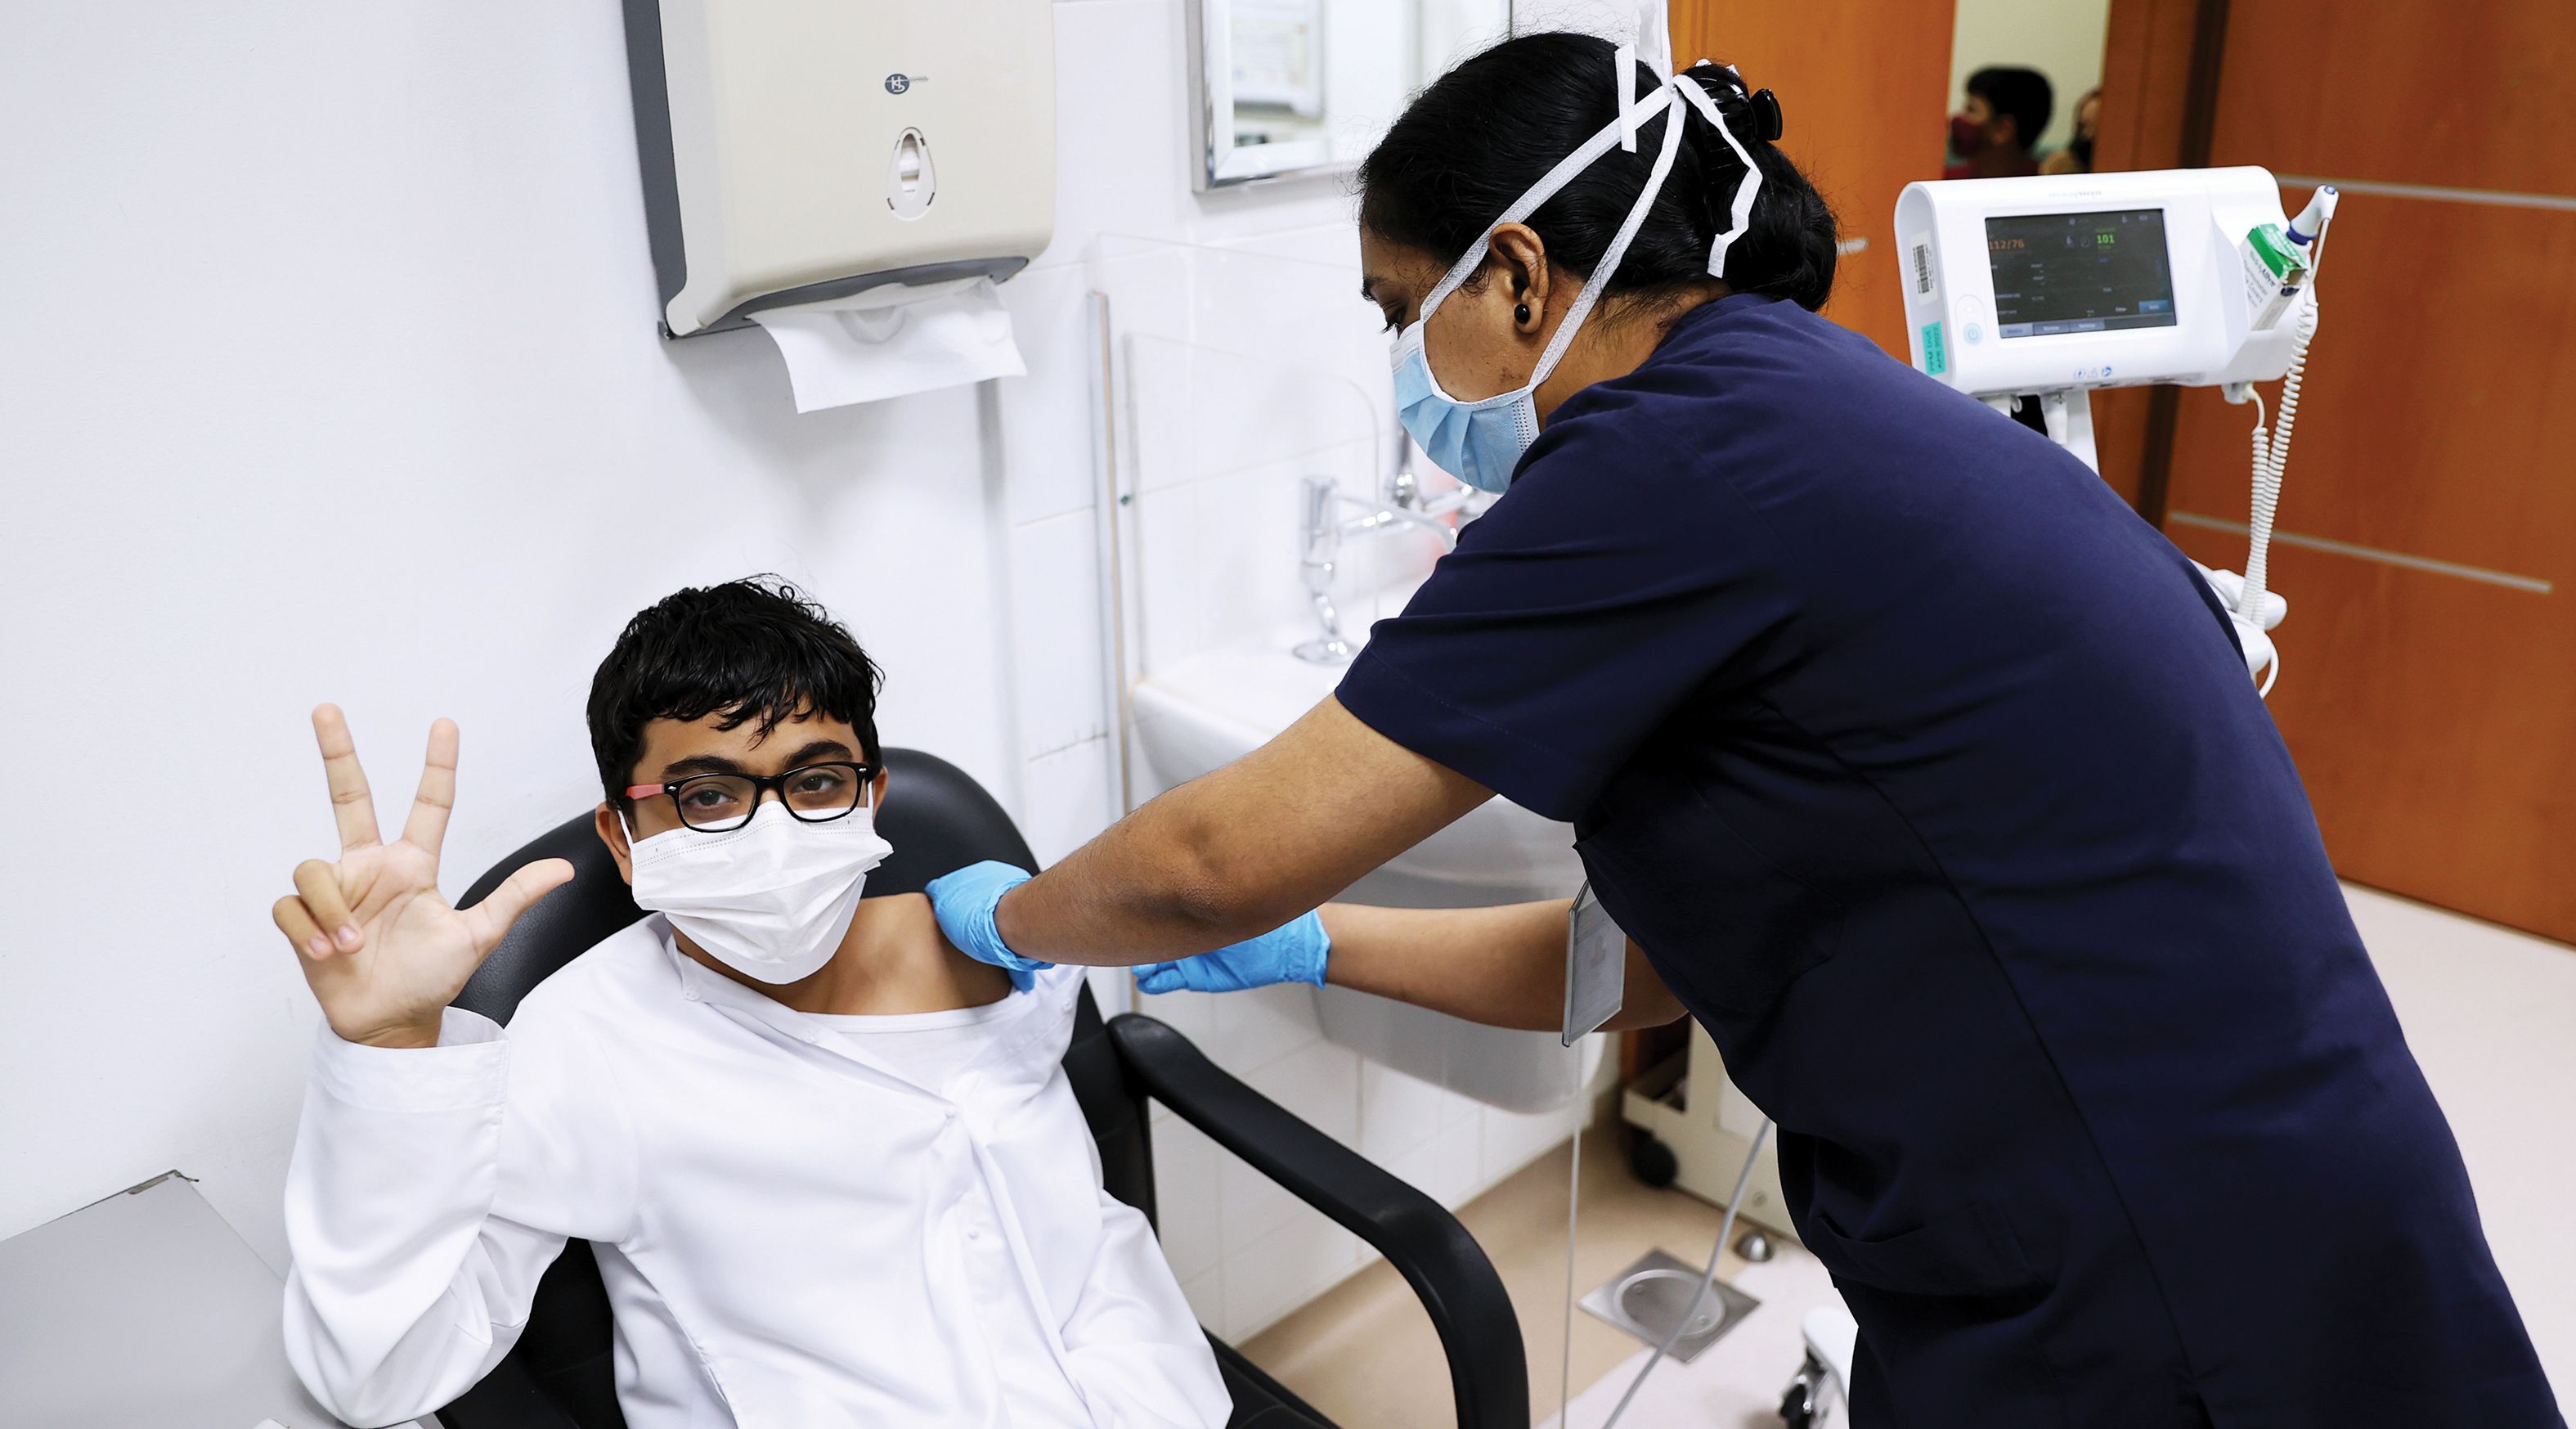 Dubai authorities have clarified that only children who are vaccinated against Covid-19 would be allowed to attend any social gatherings, exhibitions and events, such as weddings at hotels in Dubai.